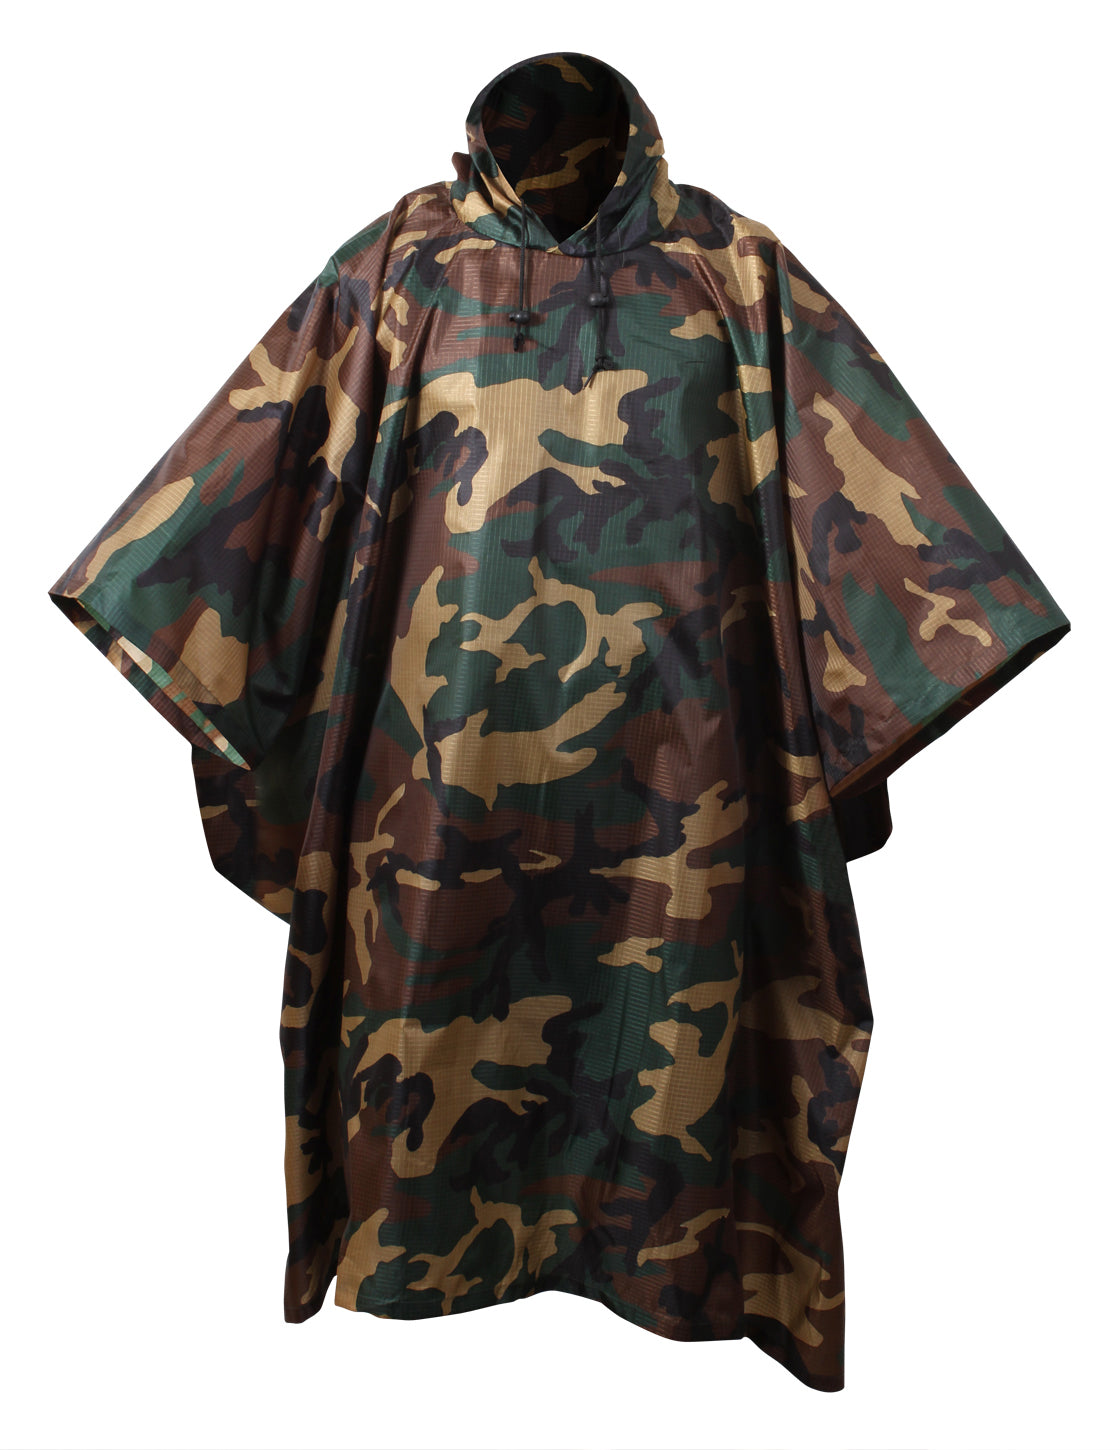 Milspec GI Type Military Rip-Stop Poncho Camo Outerwear MilTac Tactical Military Outdoor Gear Australia